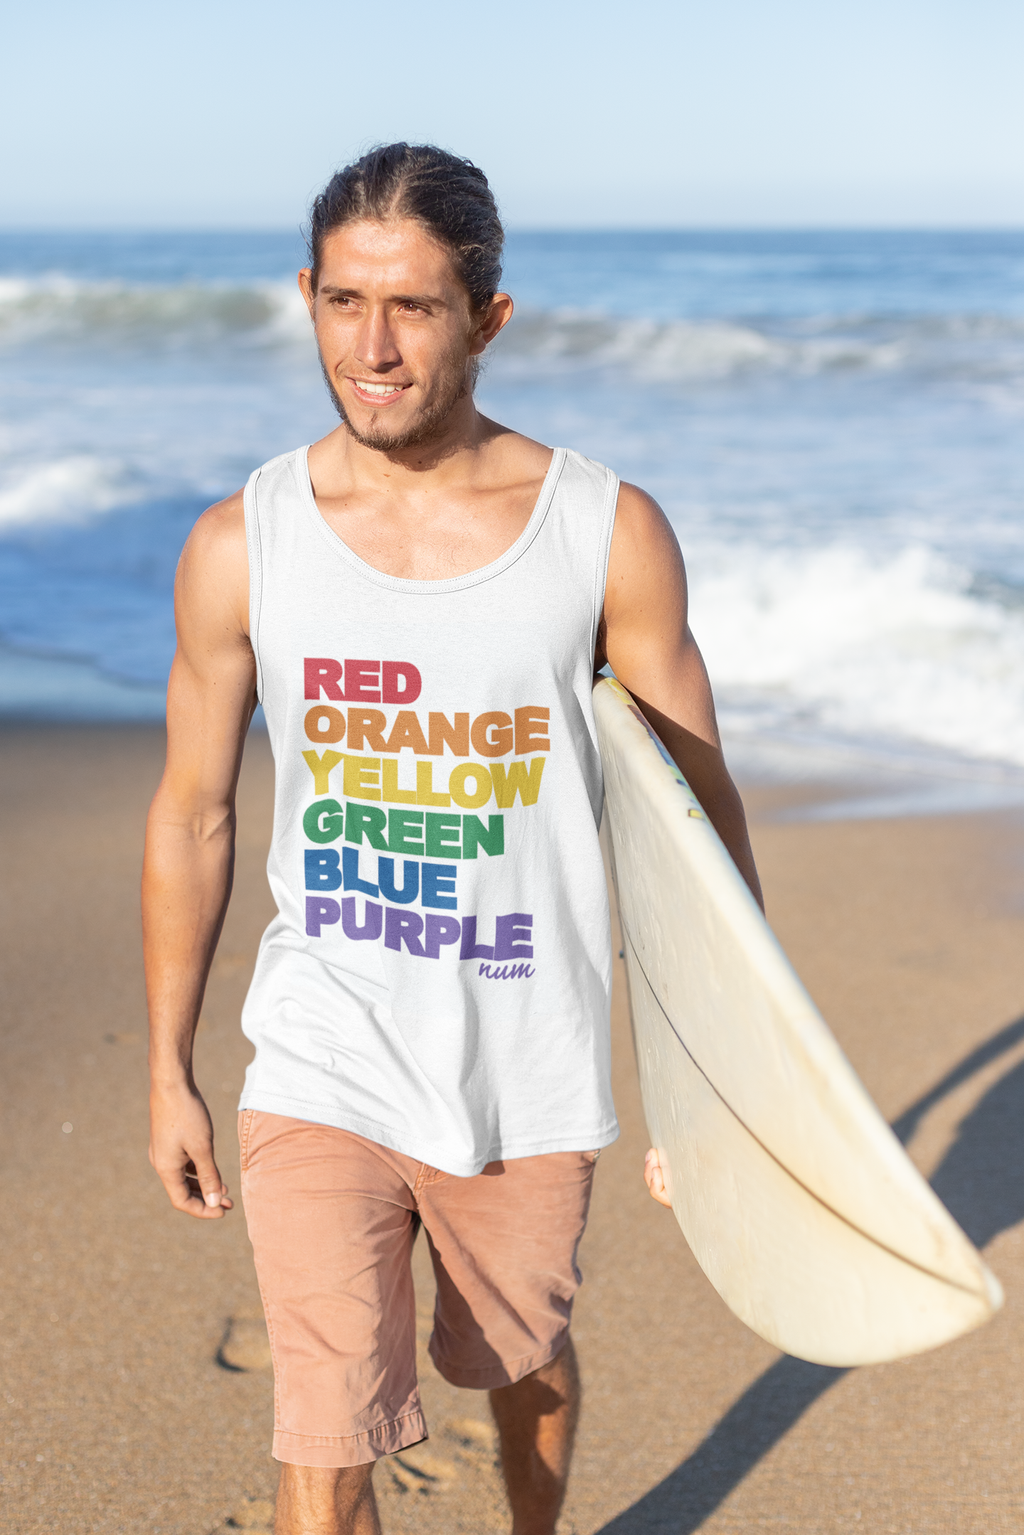 tank-top-mockup-of-a-surfer-man-carrying-his-board-at-the-beach-26756 (1).png